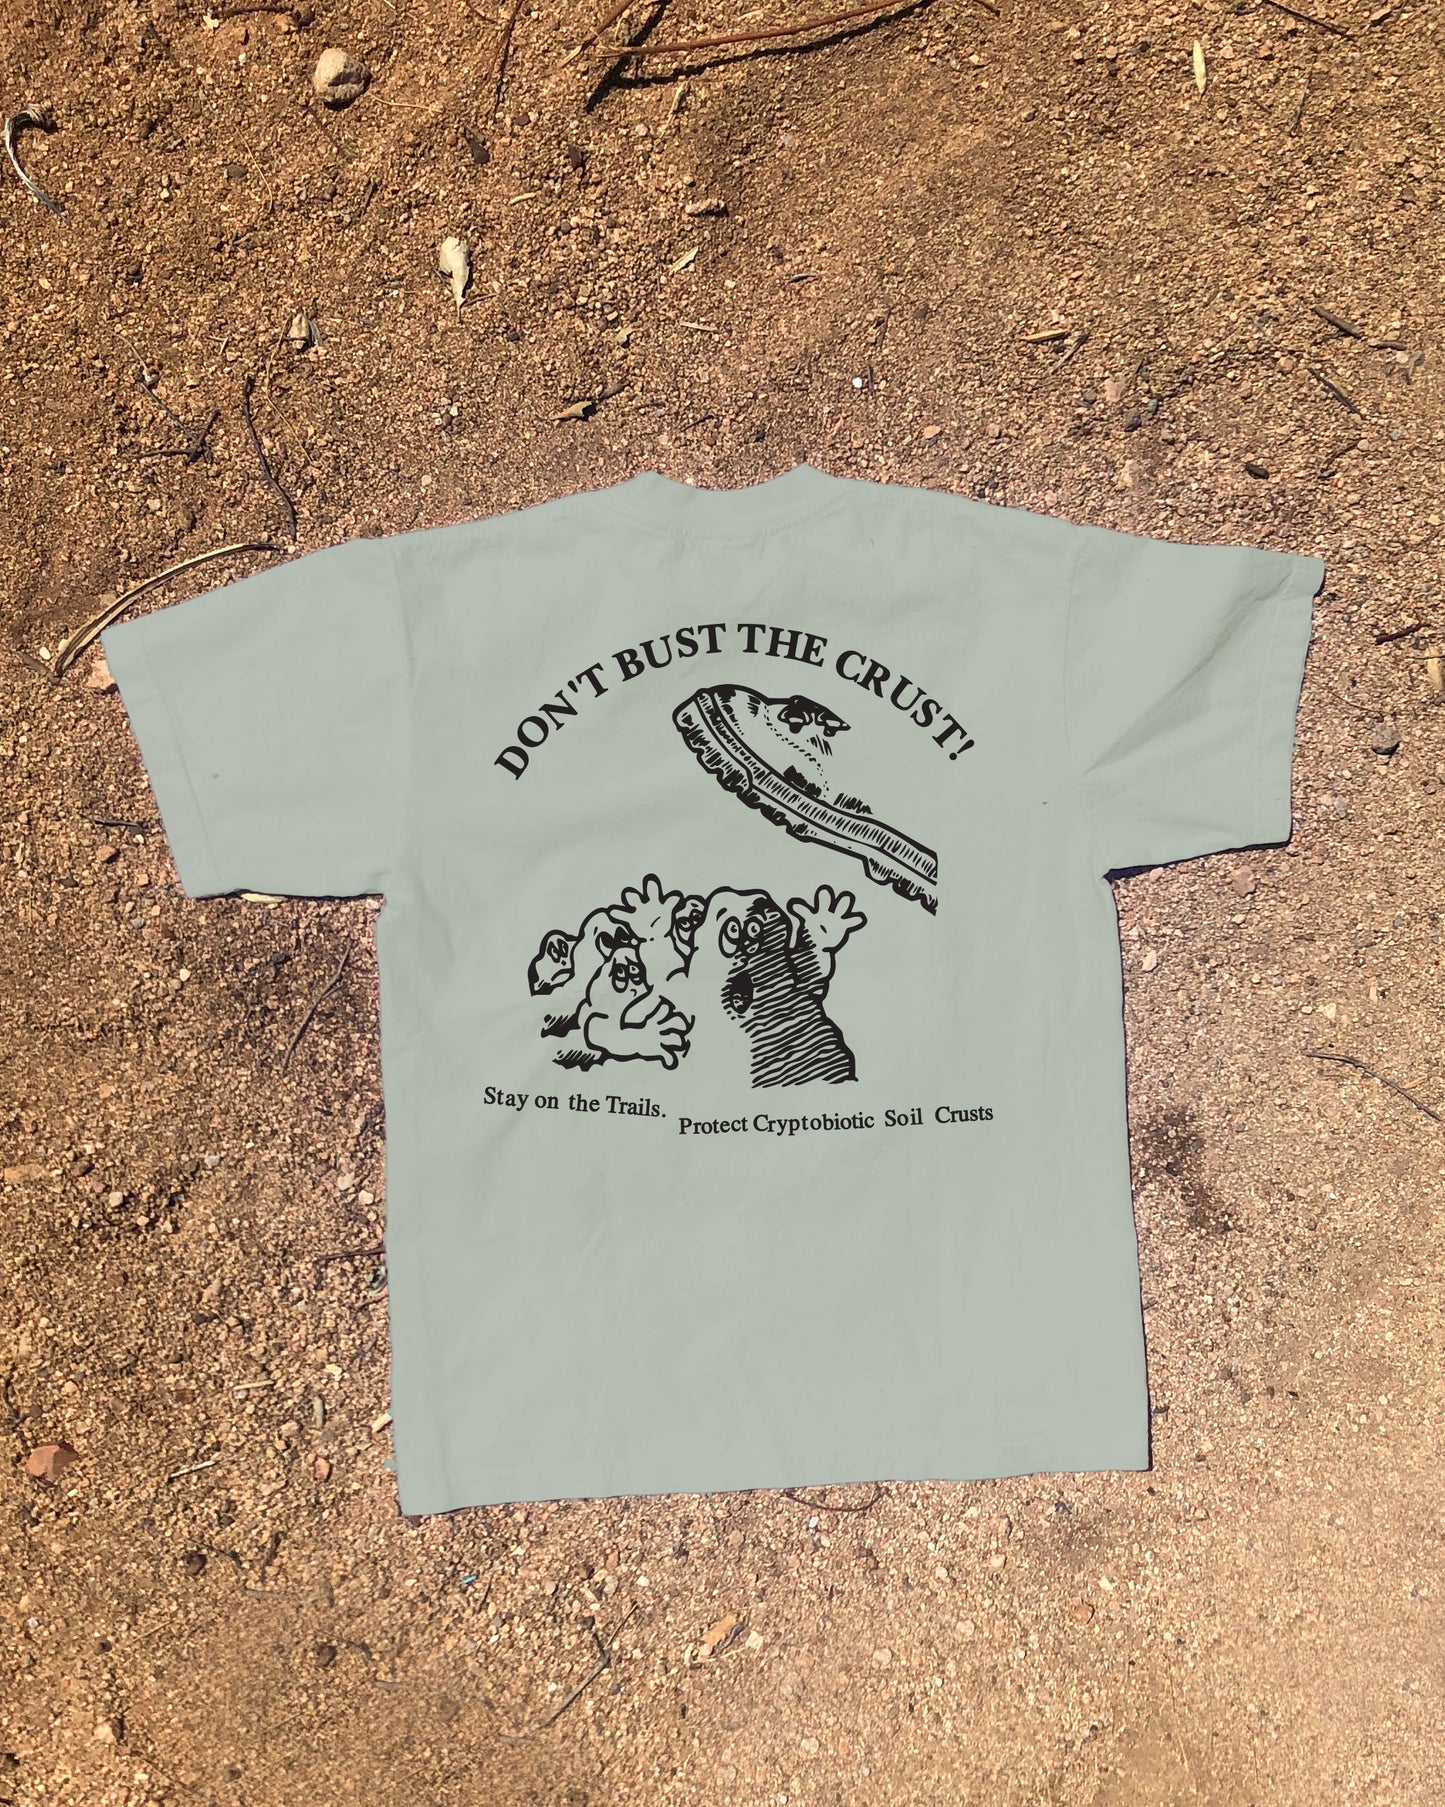 Don't Bust the Crust! Trails T-Shirt